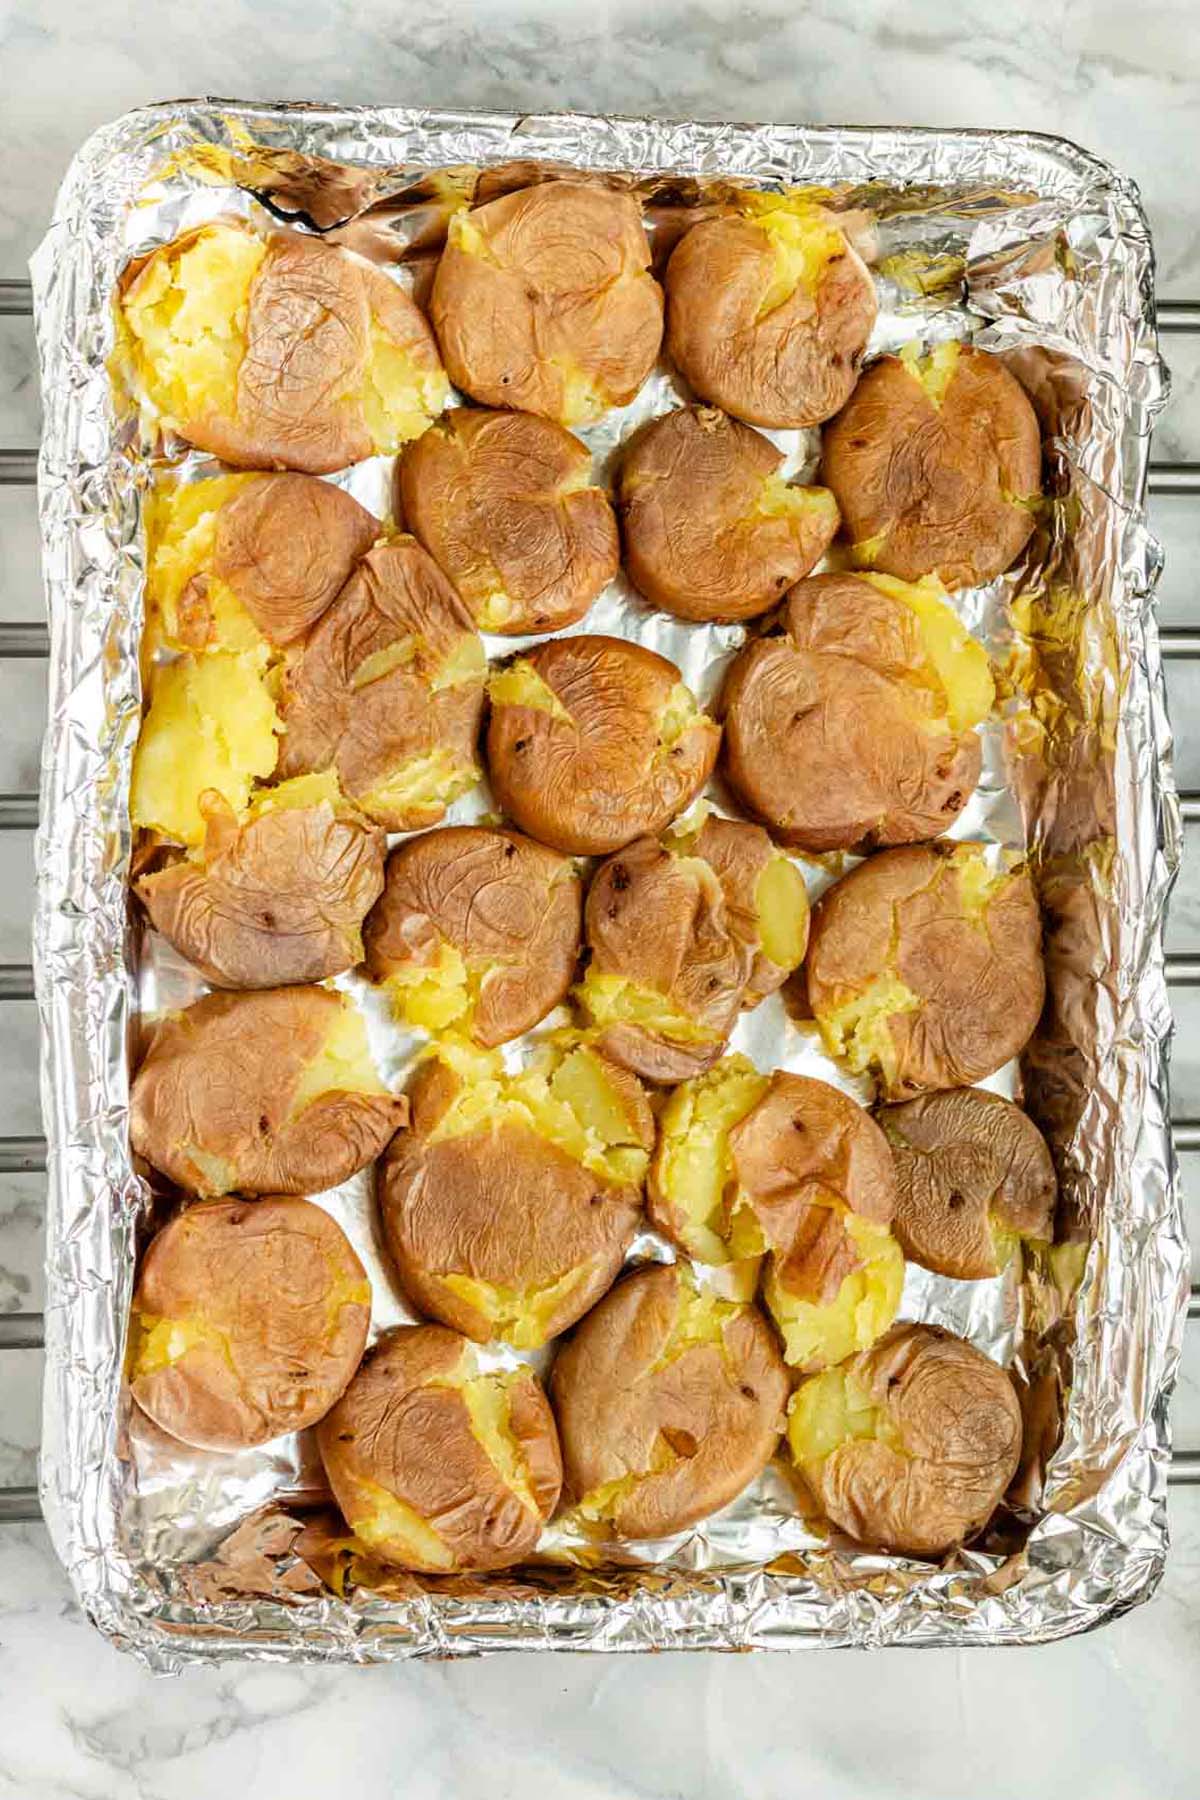 Smashed baby potatoes on a foil-lined baking sheet.